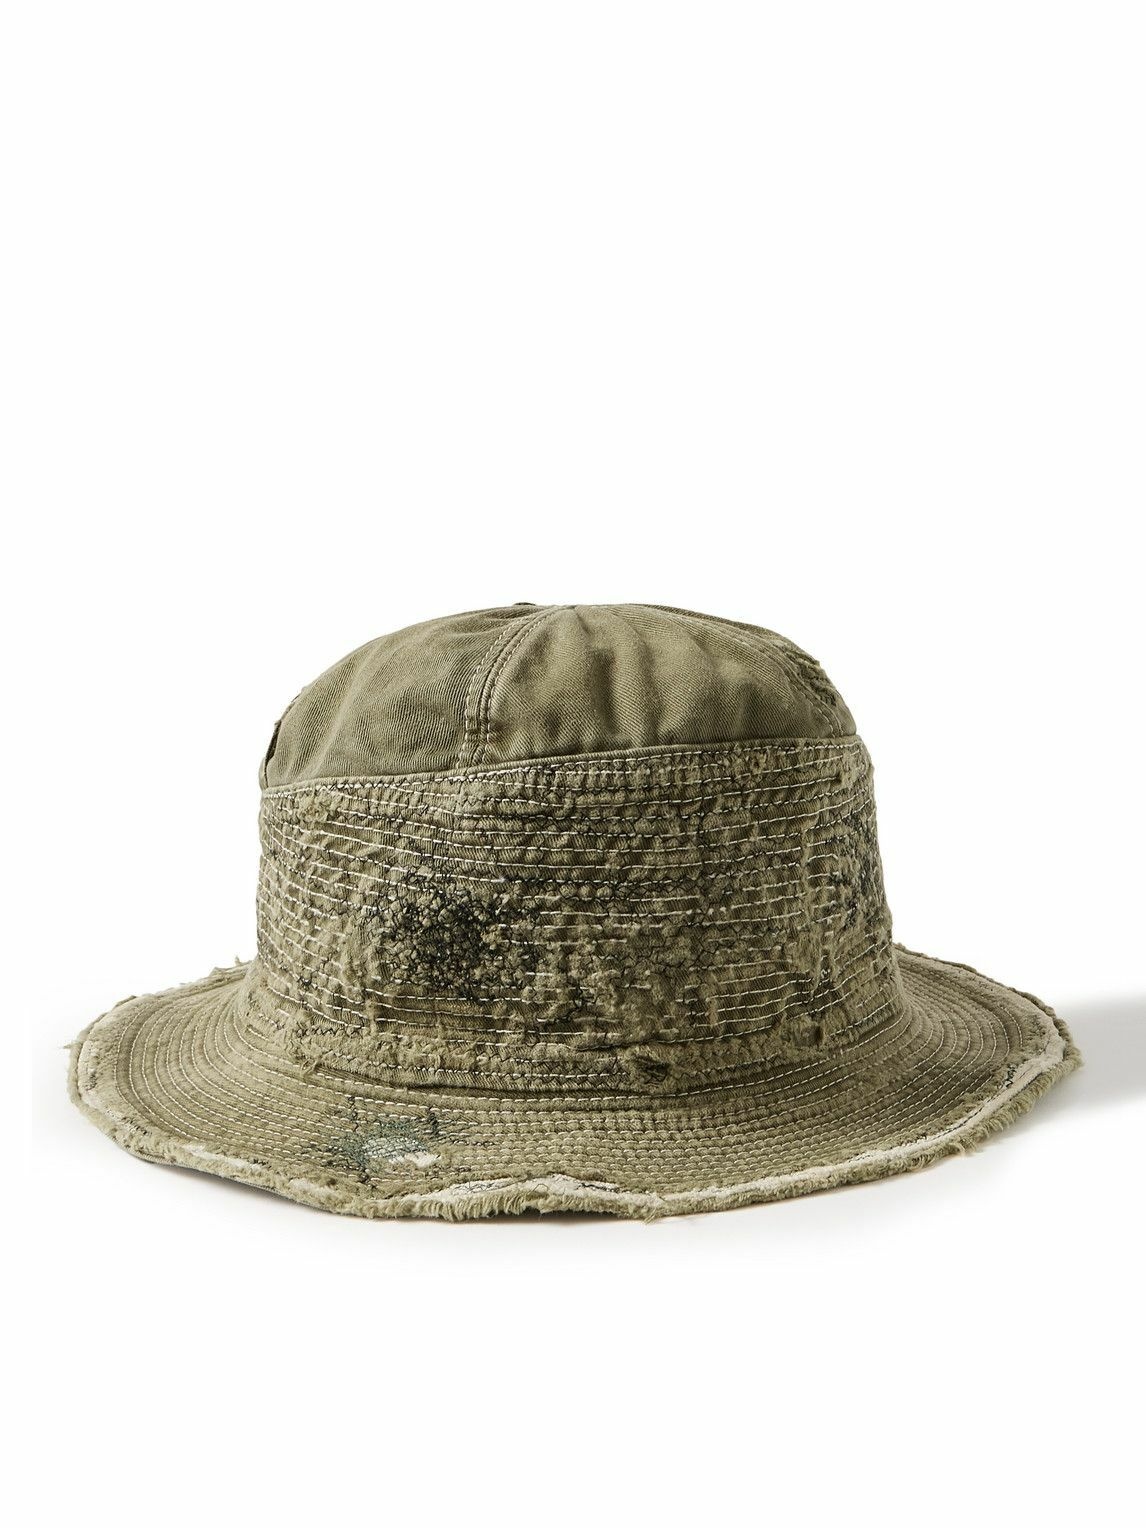 Photo: KAPITAL - The Old Man and the Sea Distressed Buckled Cotton-Twill Bucket Hat